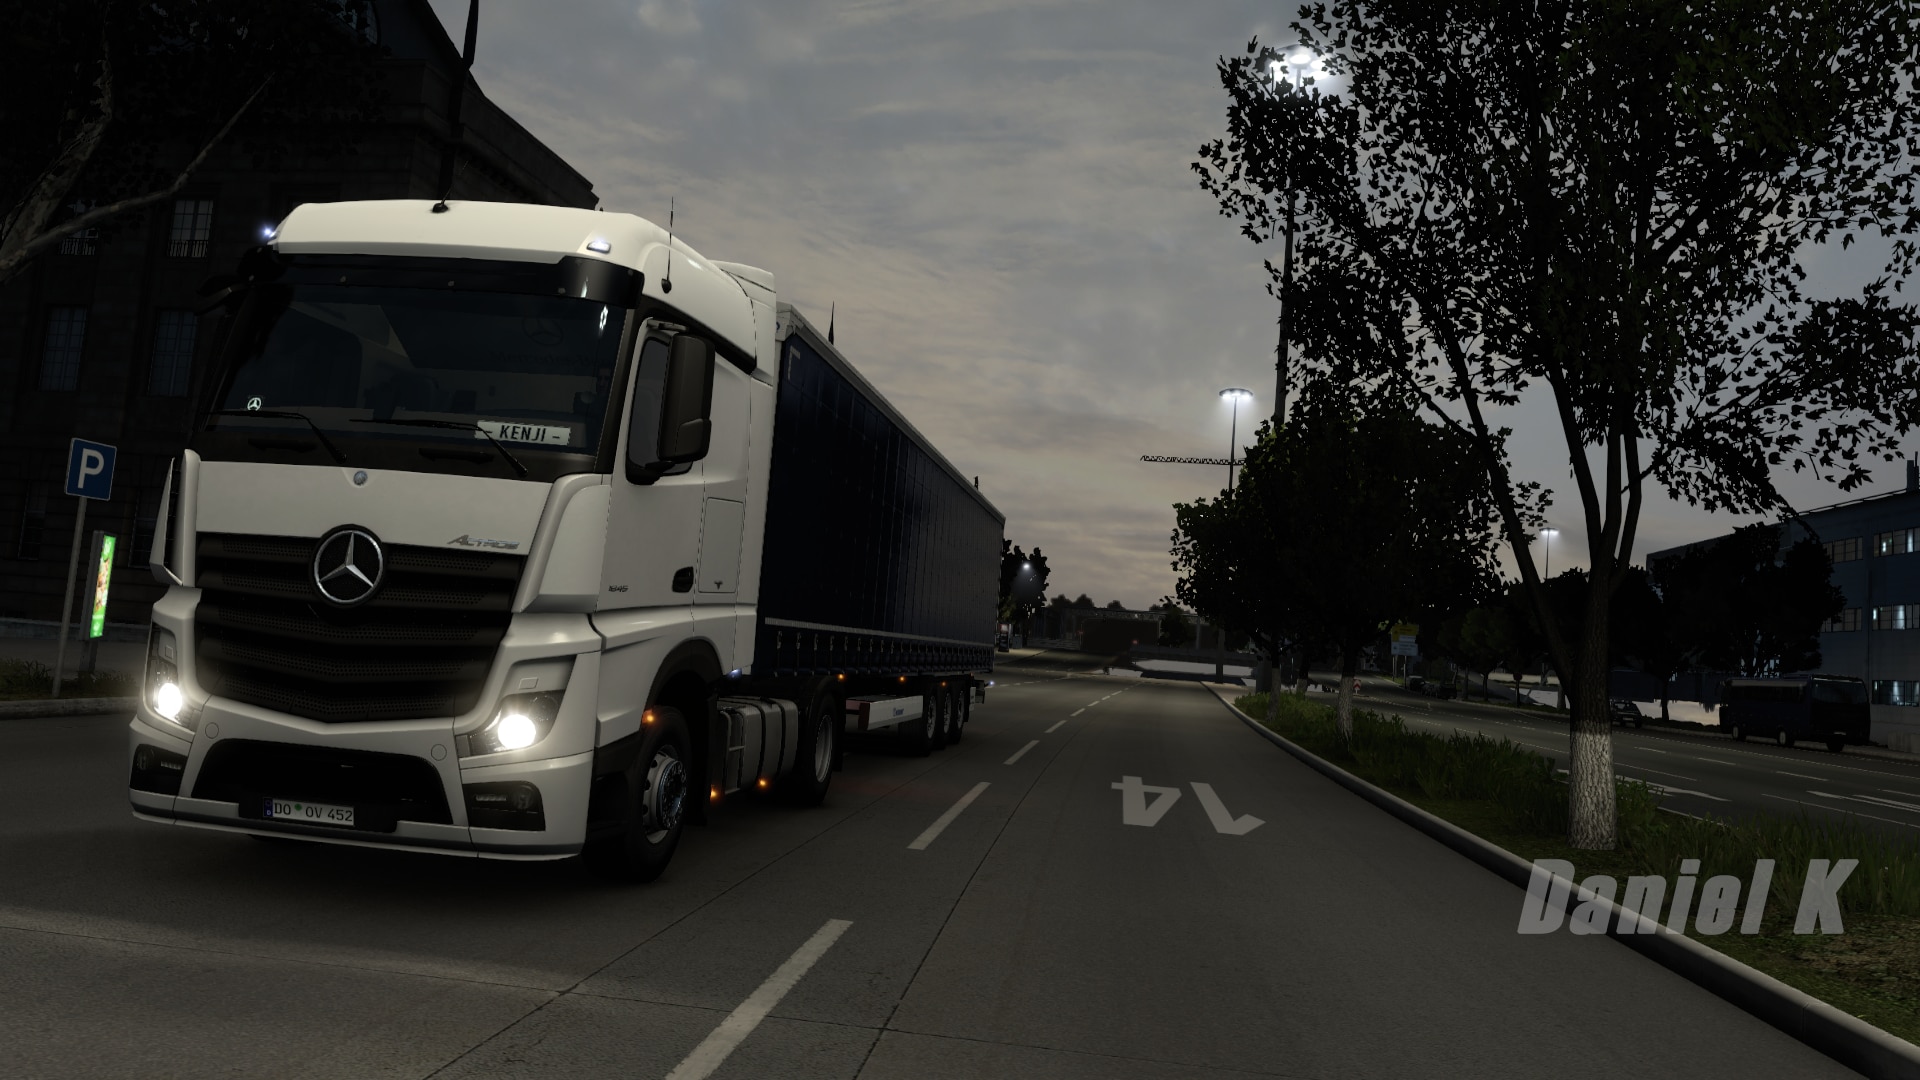 Realistic Truck Physics Mod v9.0.4 for ETS 2 - Frkn64 Modding